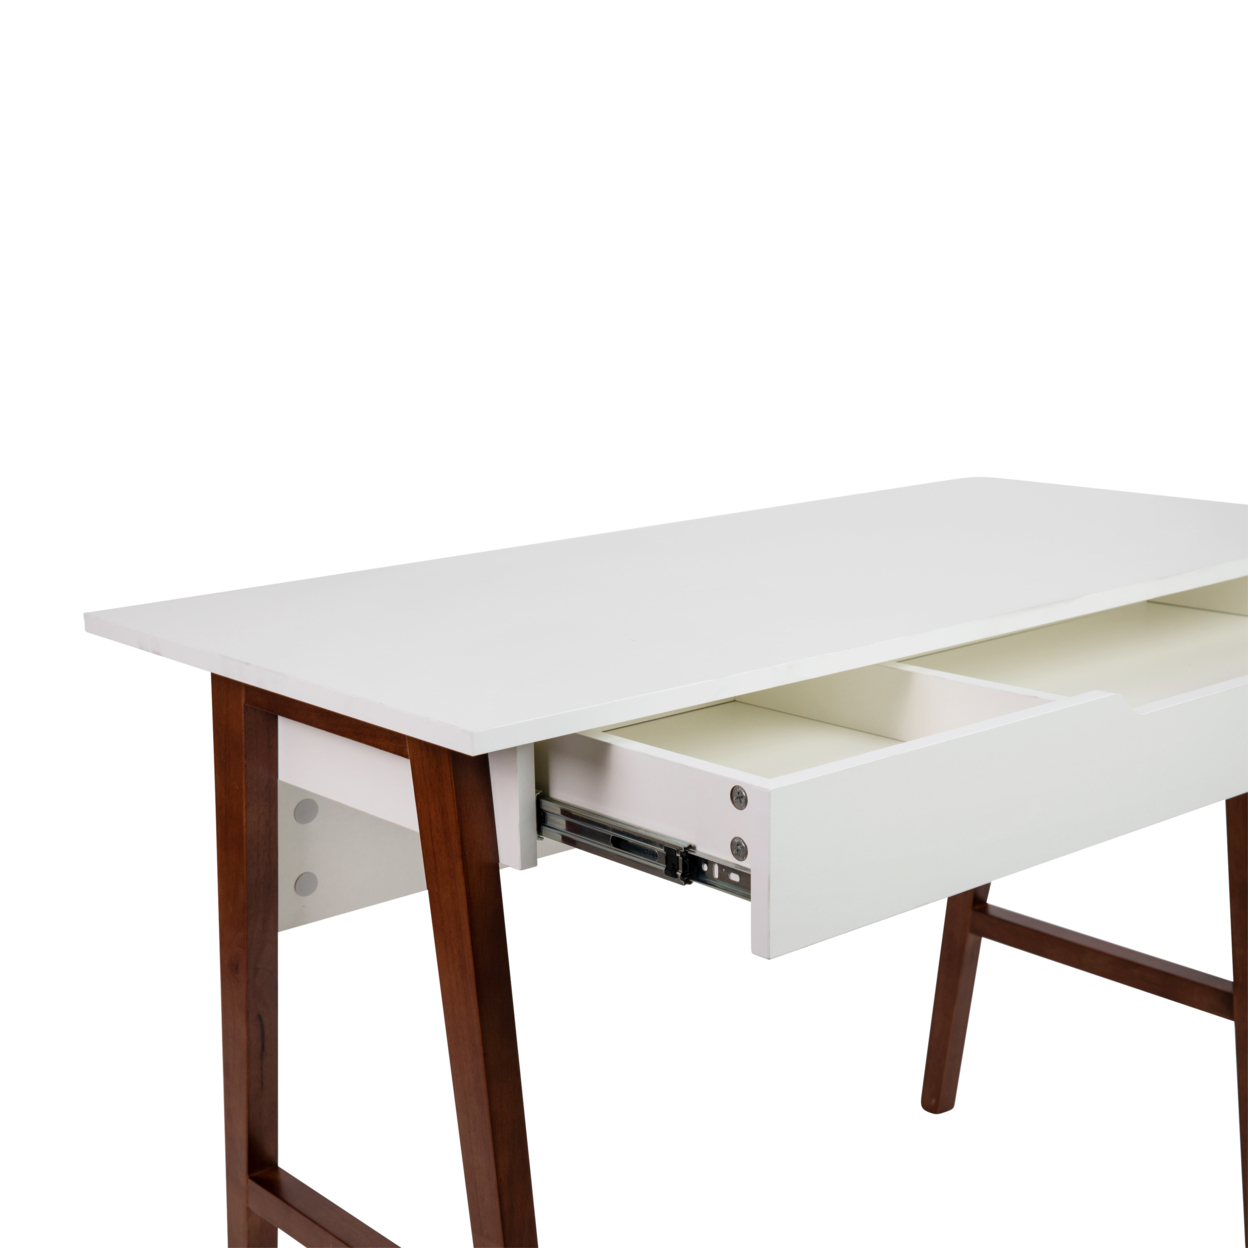 Home Office Writing Computer Desk With Drawer - Table Desk For Writing And Work, White And Walnut